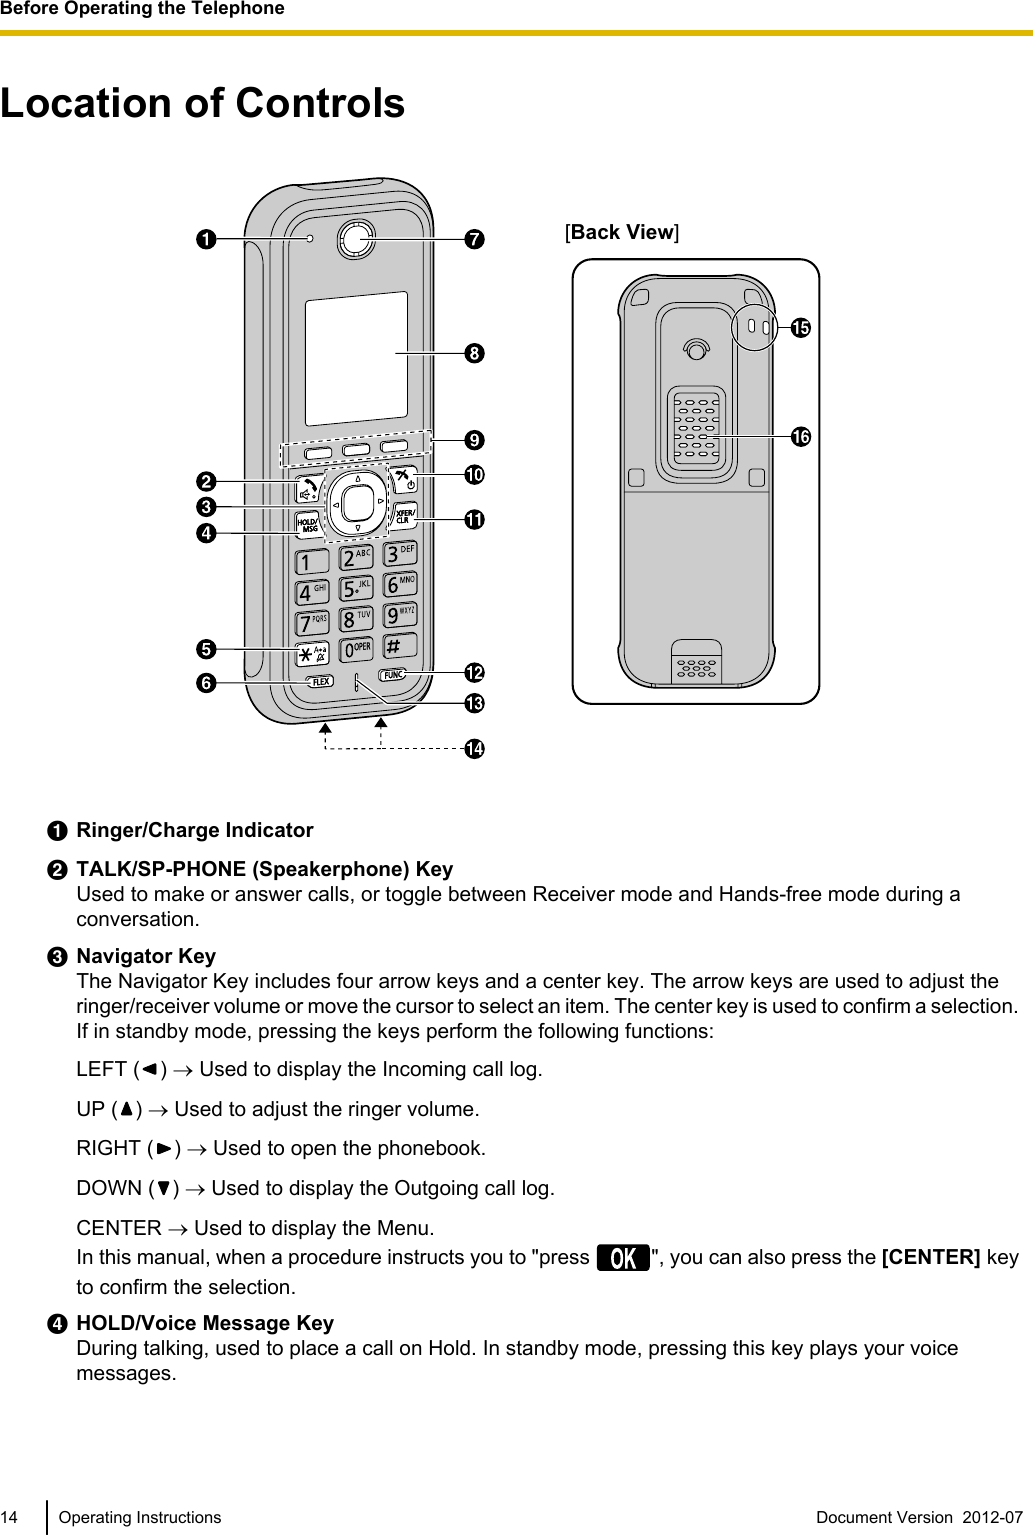 Location of Controls[Back View]ARinger/Charge IndicatorBTALK/SP-PHONE (Speakerphone) KeyUsed to make or answer calls, or toggle between Receiver mode and Hands-free mode during aconversation.CNavigator KeyThe Navigator Key includes four arrow keys and a center key. The arrow keys are used to adjust theringer/receiver volume or move the cursor to select an item. The center key is used to confirm a selection.If in standby mode, pressing the keys perform the following functions:LEFT ( ) ® Used to display the Incoming call log.UP ( ) ® Used to adjust the ringer volume.RIGHT ( ) ® Used to open the phonebook.DOWN ( ) ® Used to display the Outgoing call log.CENTER ® Used to display the Menu.In this manual, when a procedure instructs you to &quot;press  &quot;, you can also press the [CENTER] keyto confirm the selection.DHOLD/Voice Message KeyDuring talking, used to place a call on Hold. In standby mode, pressing this key plays your voicemessages.14 Operating Instructions Document Version  2012-07  Before Operating the Telephone